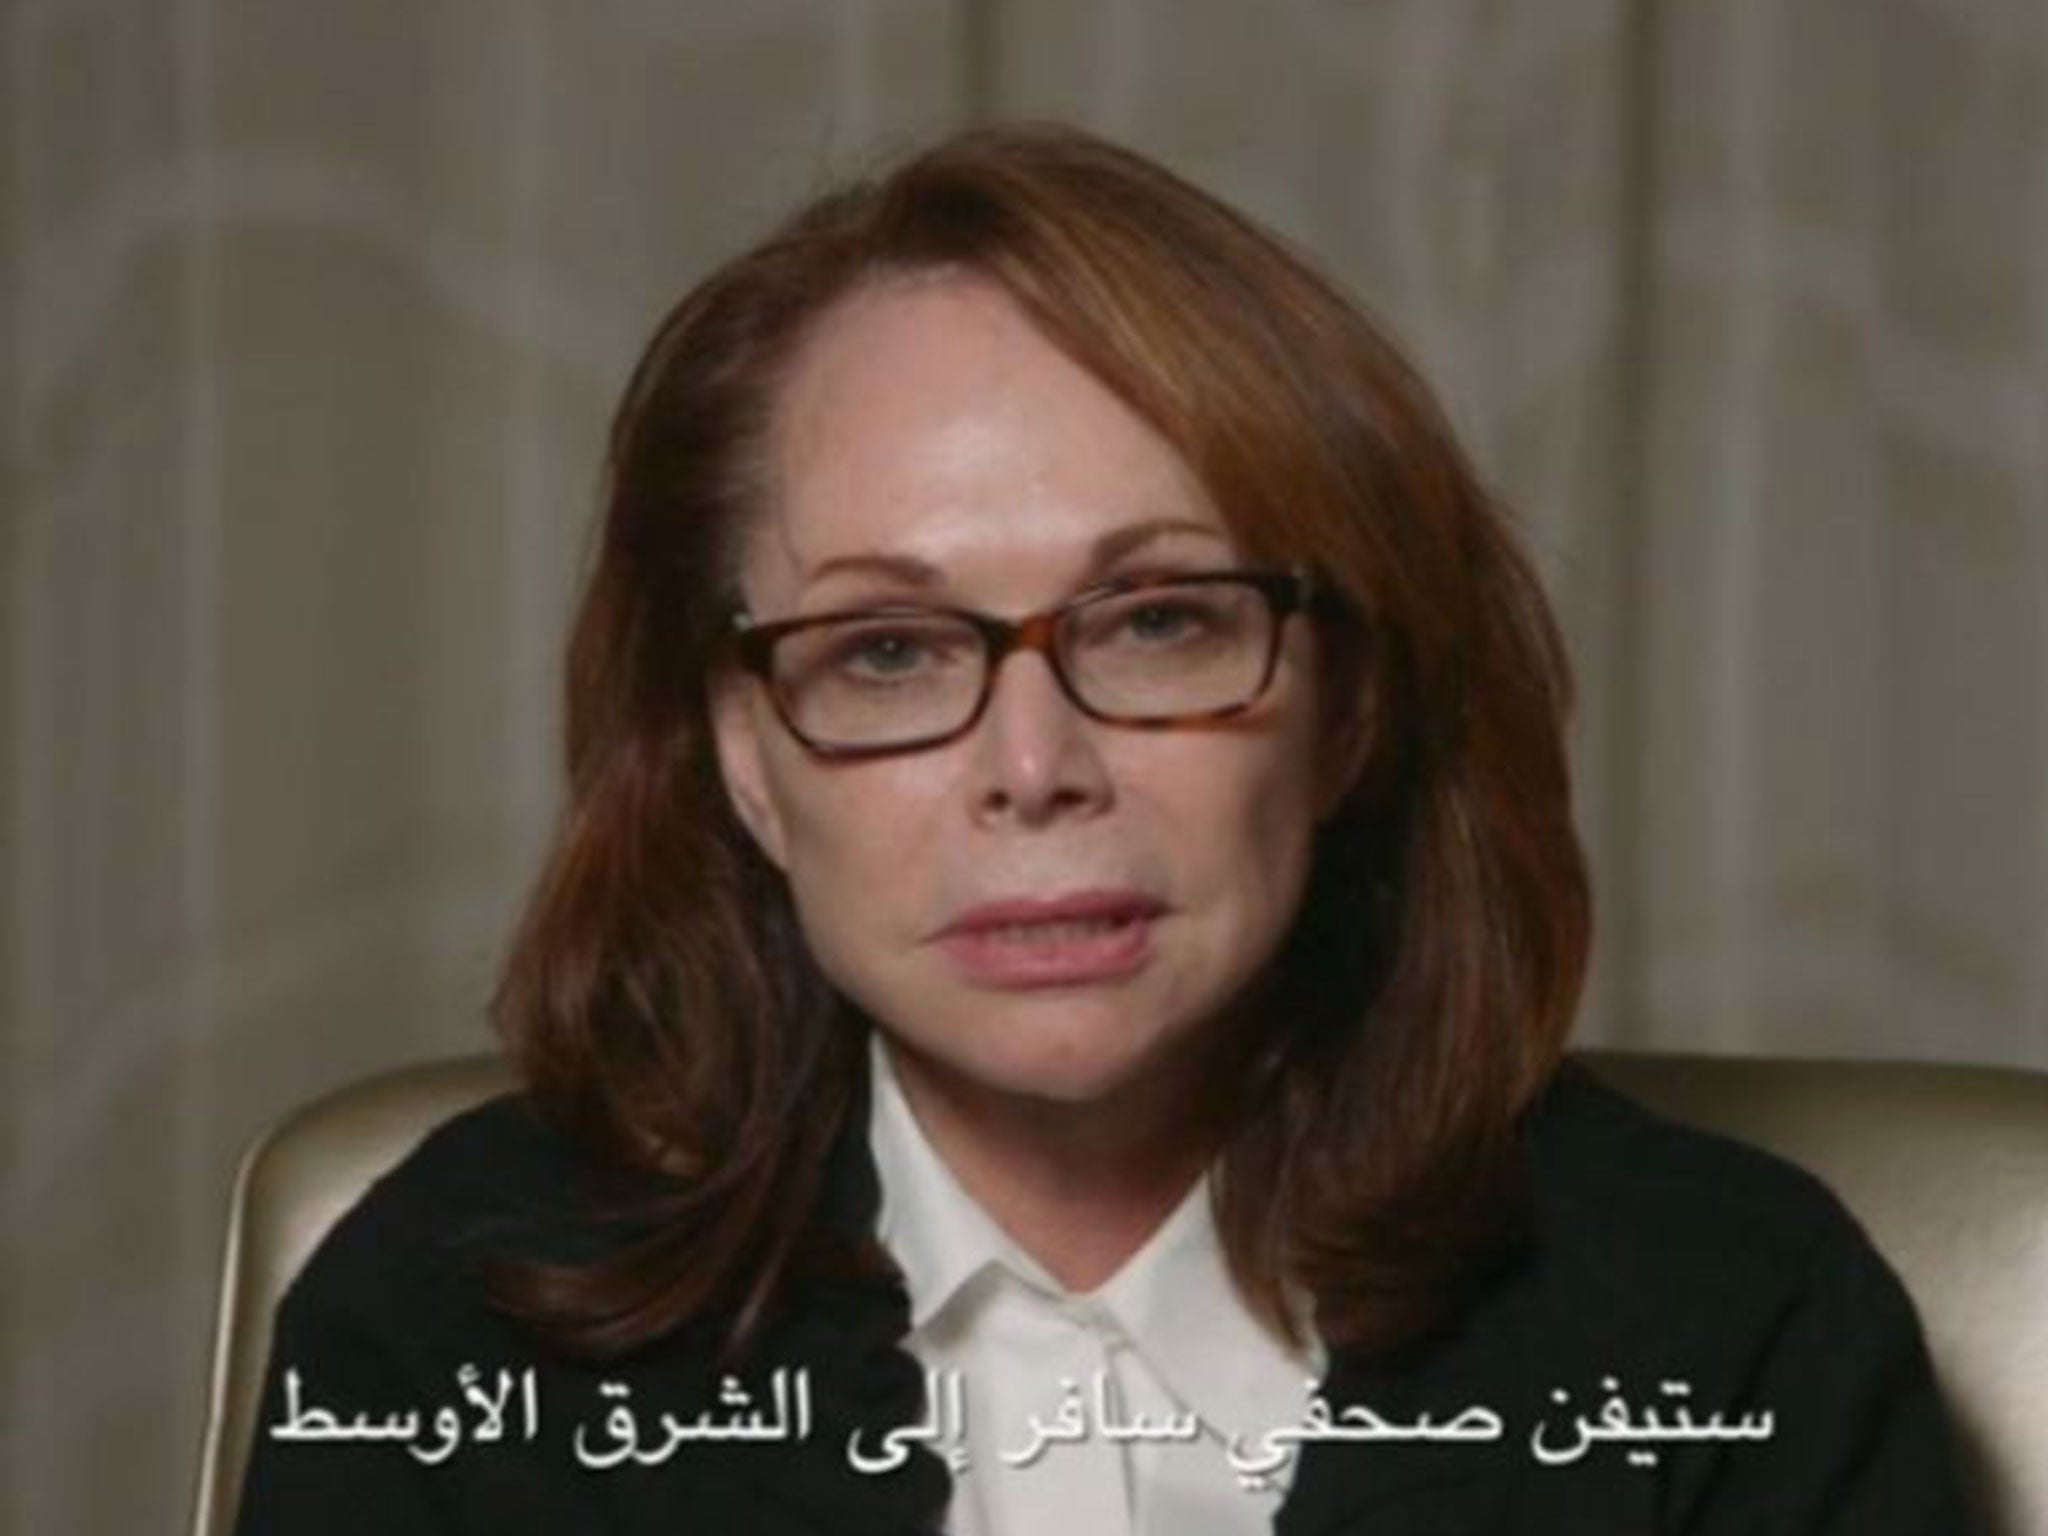 Shirley Sotloff recently made an appeal to the captors of her son